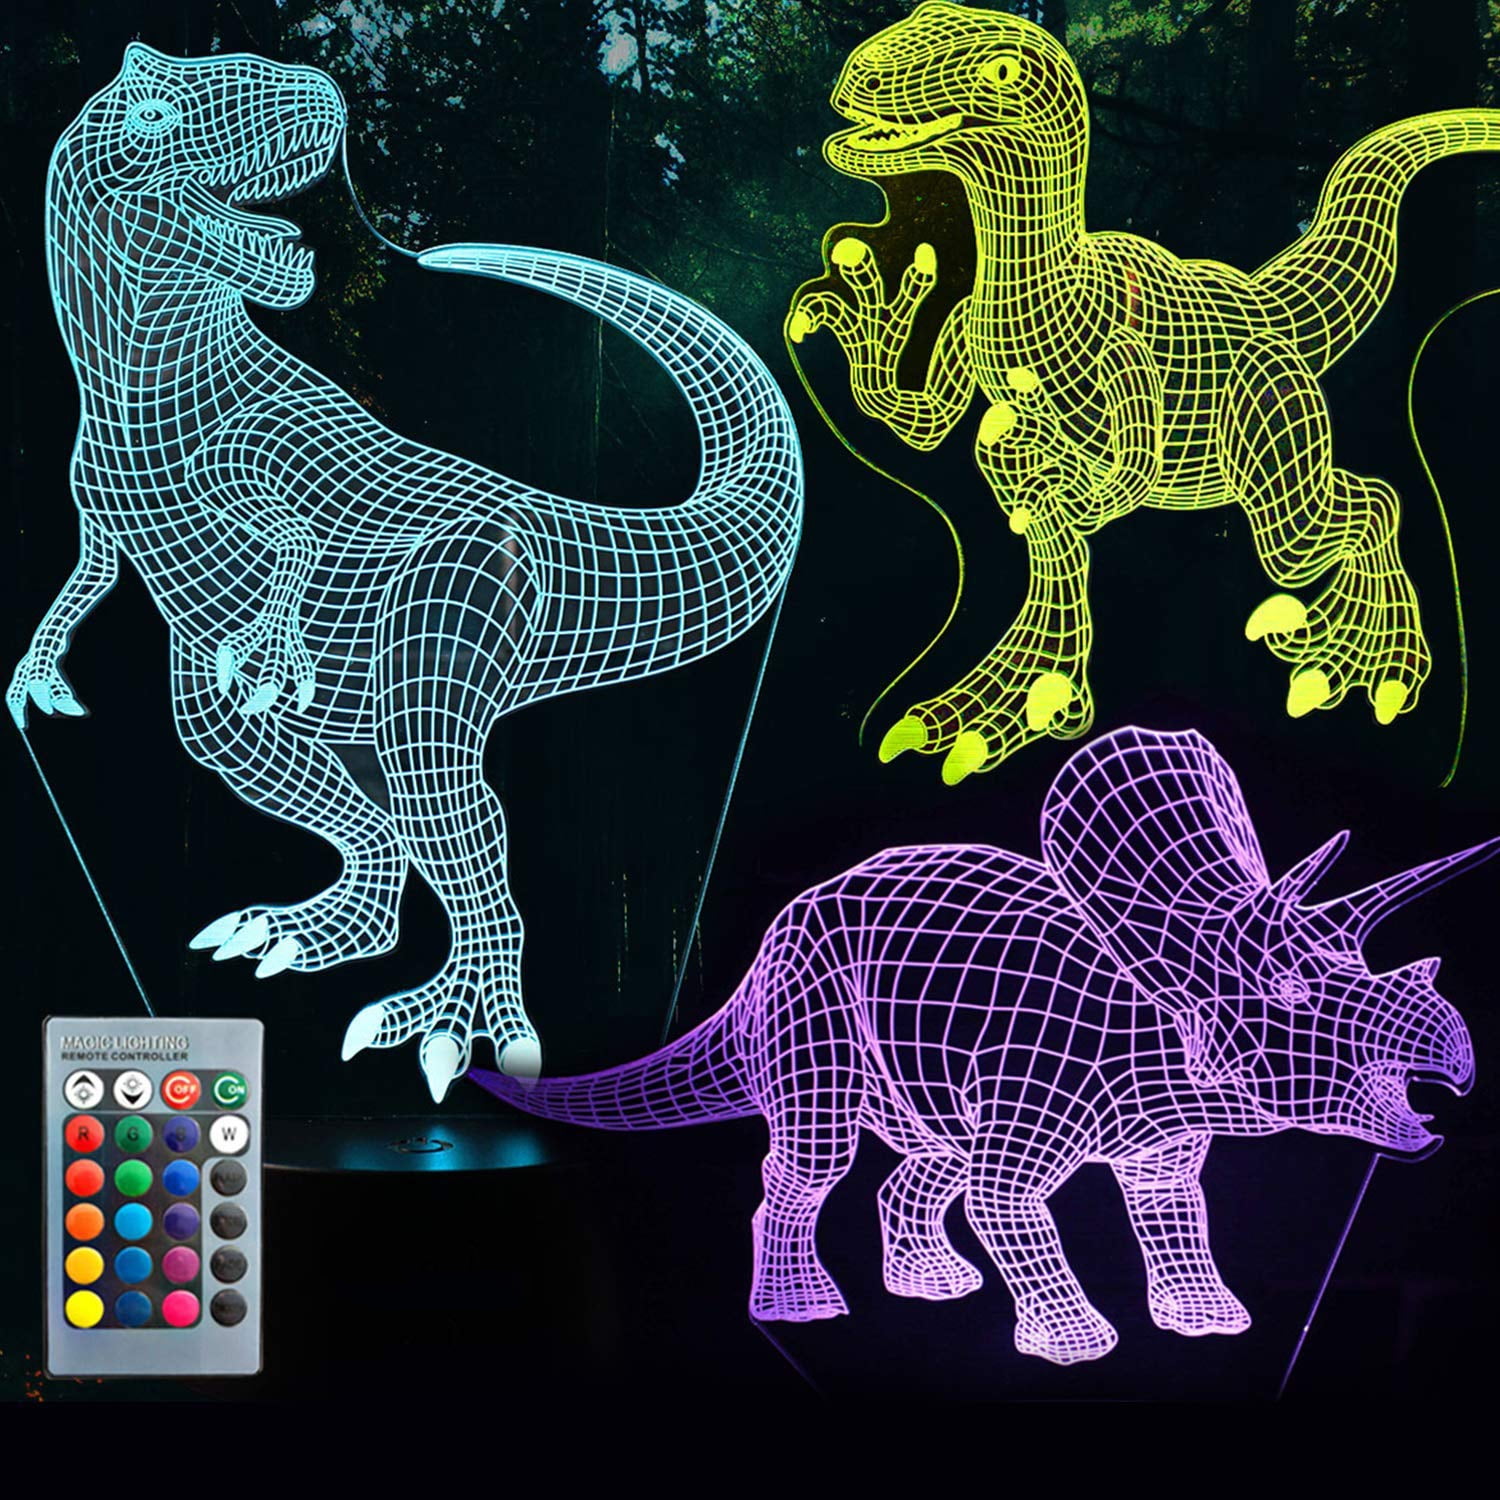 ONXE LED Illusion Lamp 7 Colors Changing Touch Switch with Crack Base Dinosaur 3D Night Light Bedroom Decorative Lighting for Boys Girls Kids Christmas Gifts 7 Color Touch